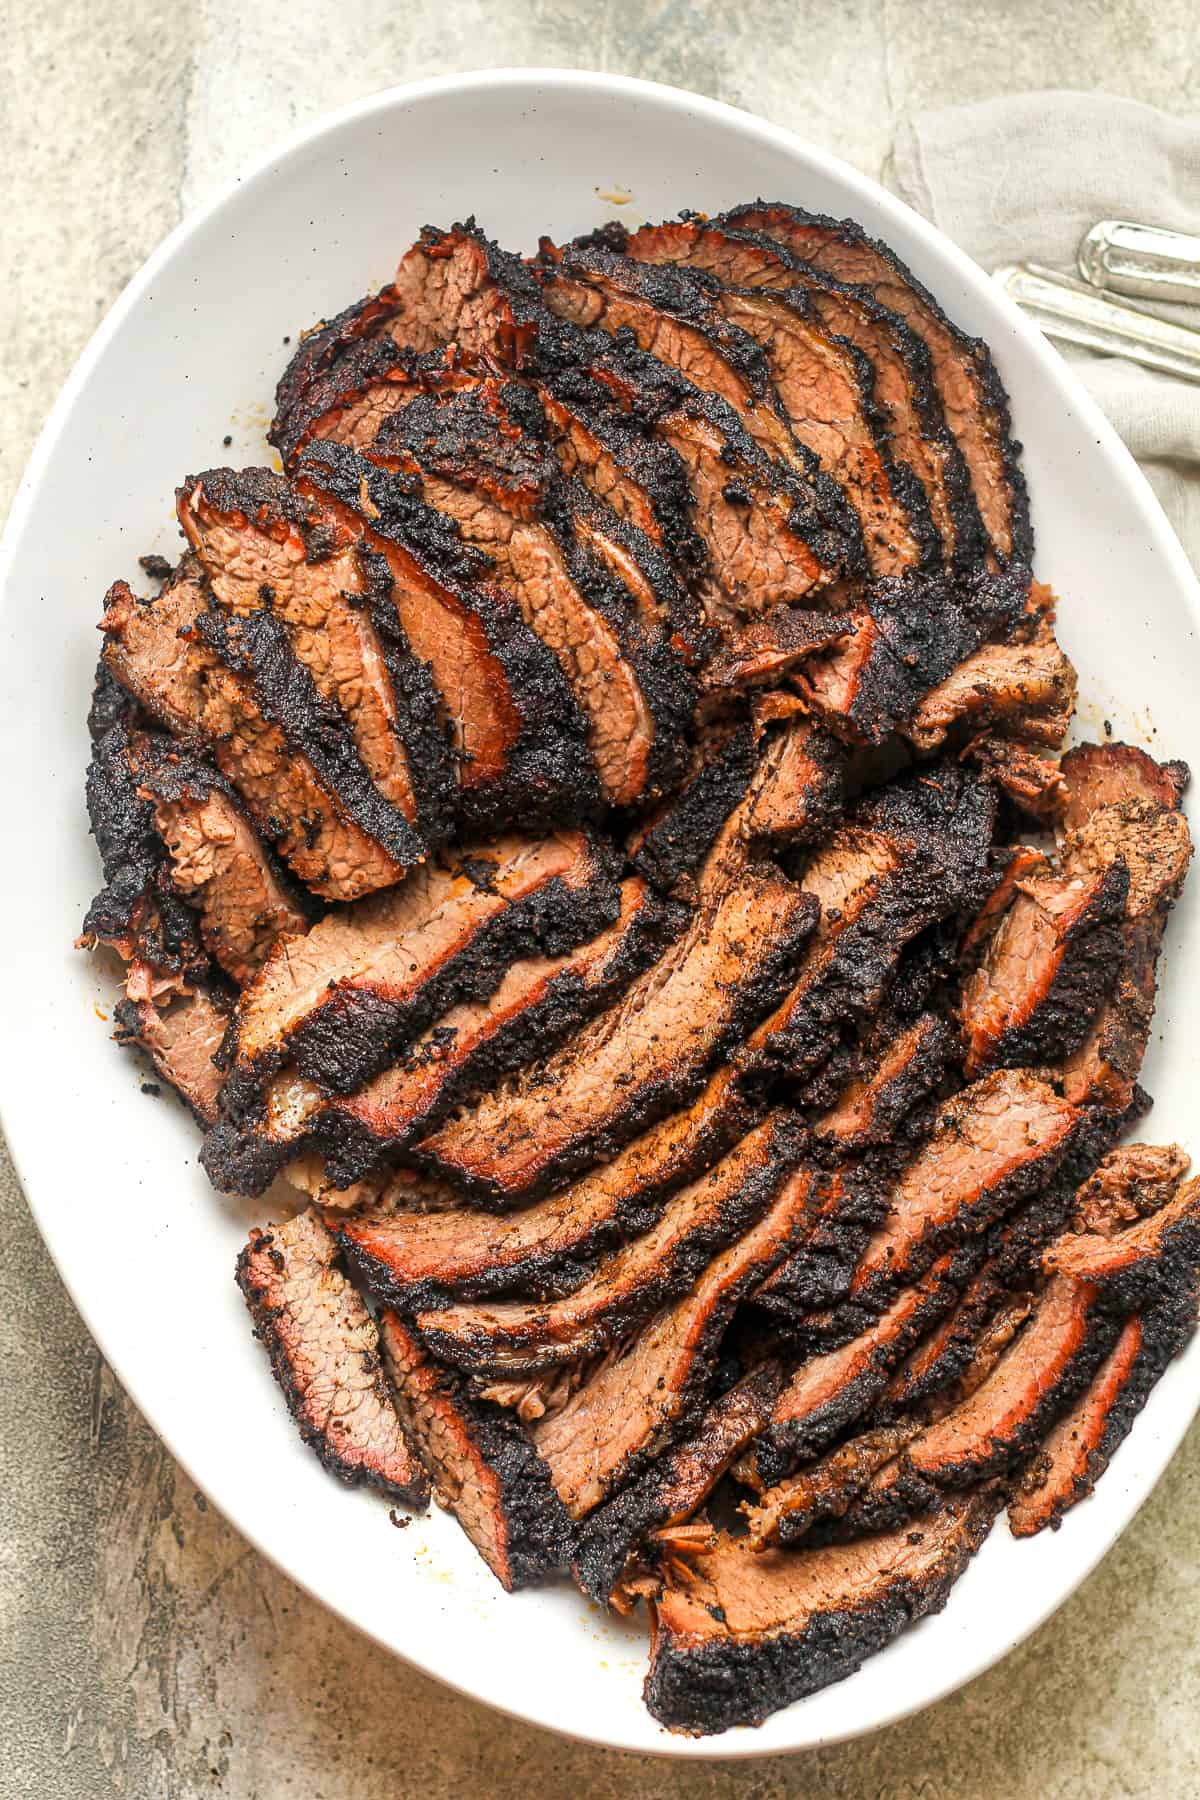 An oblong dish of sliced, smoked brisket.